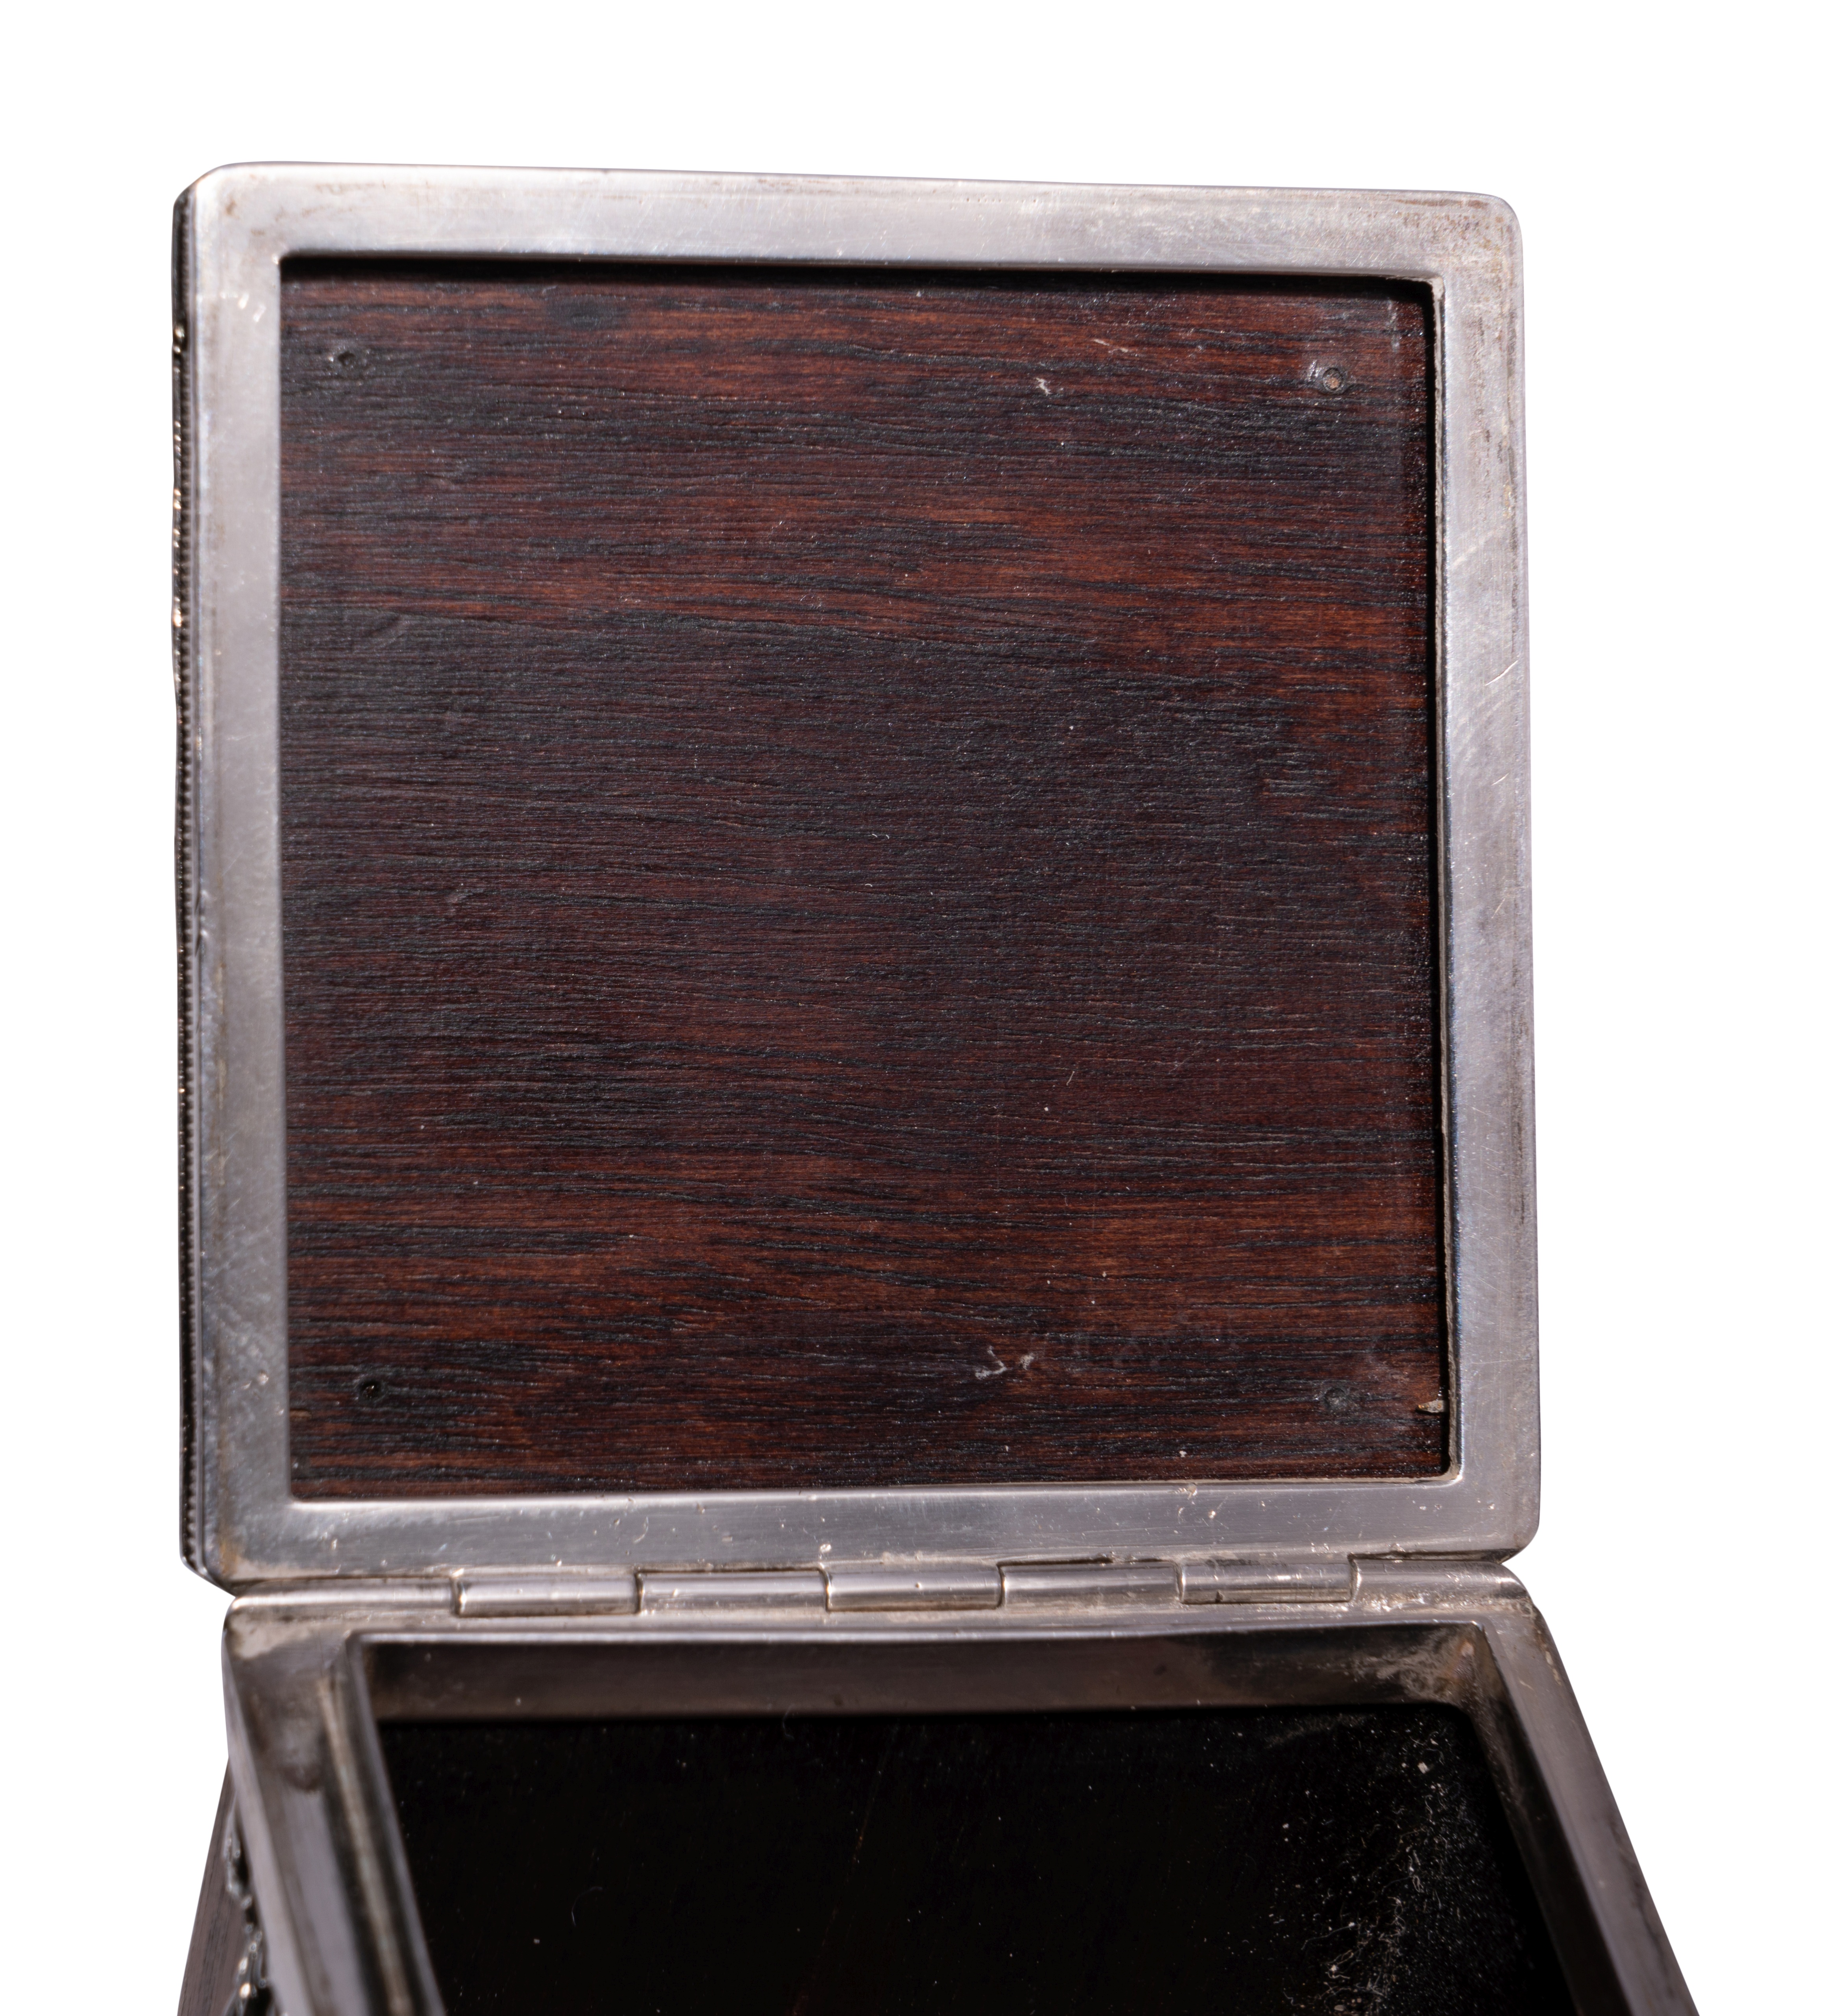 A Faberge Silver-Mounted Rosewood Stamp Box - Image 5 of 9